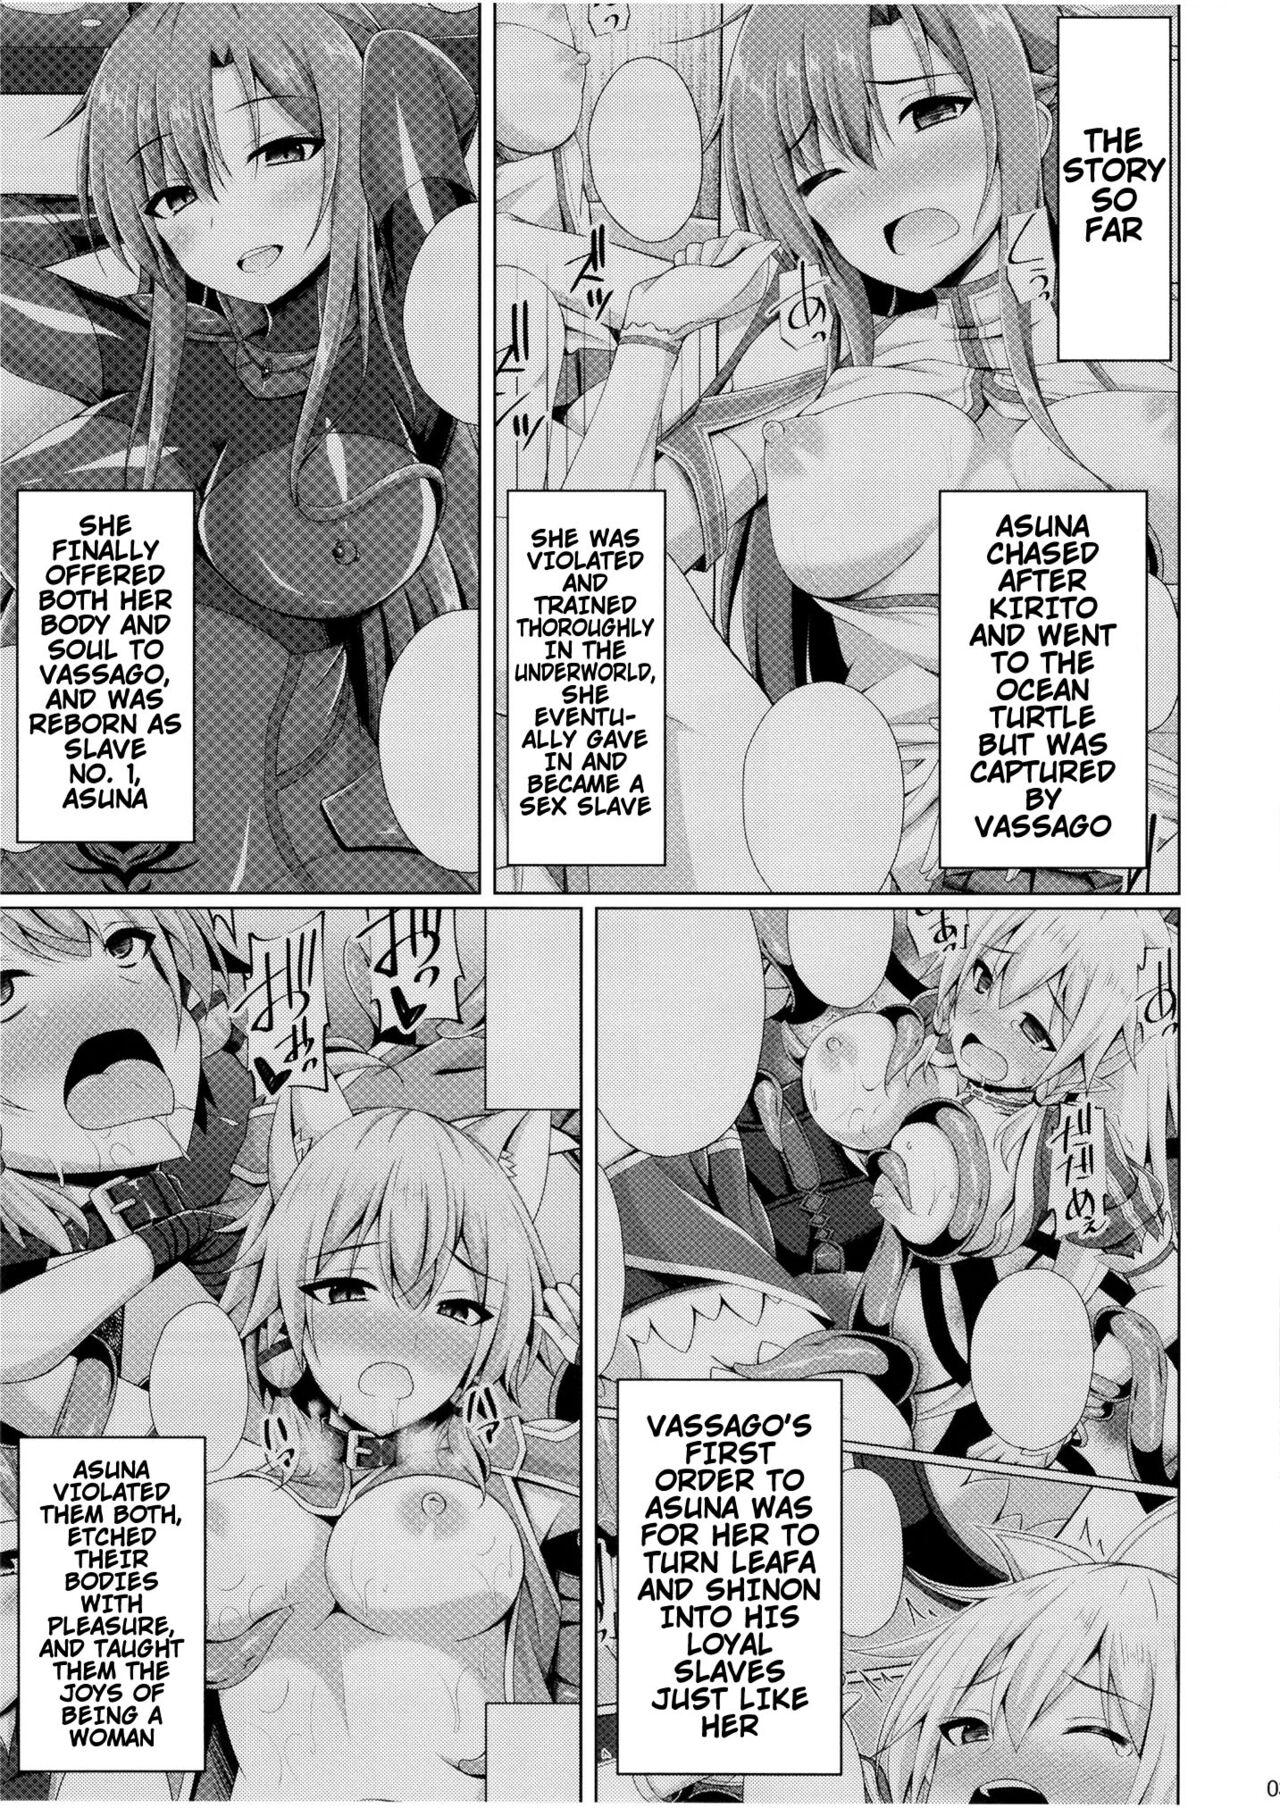 Furry Kuro no Kenshito Yobareta Ore wa mou nai... | There's Nothing Left Of Me From When I Was The Black Knight - Sword art online Hot Women Having Sex - Page 2